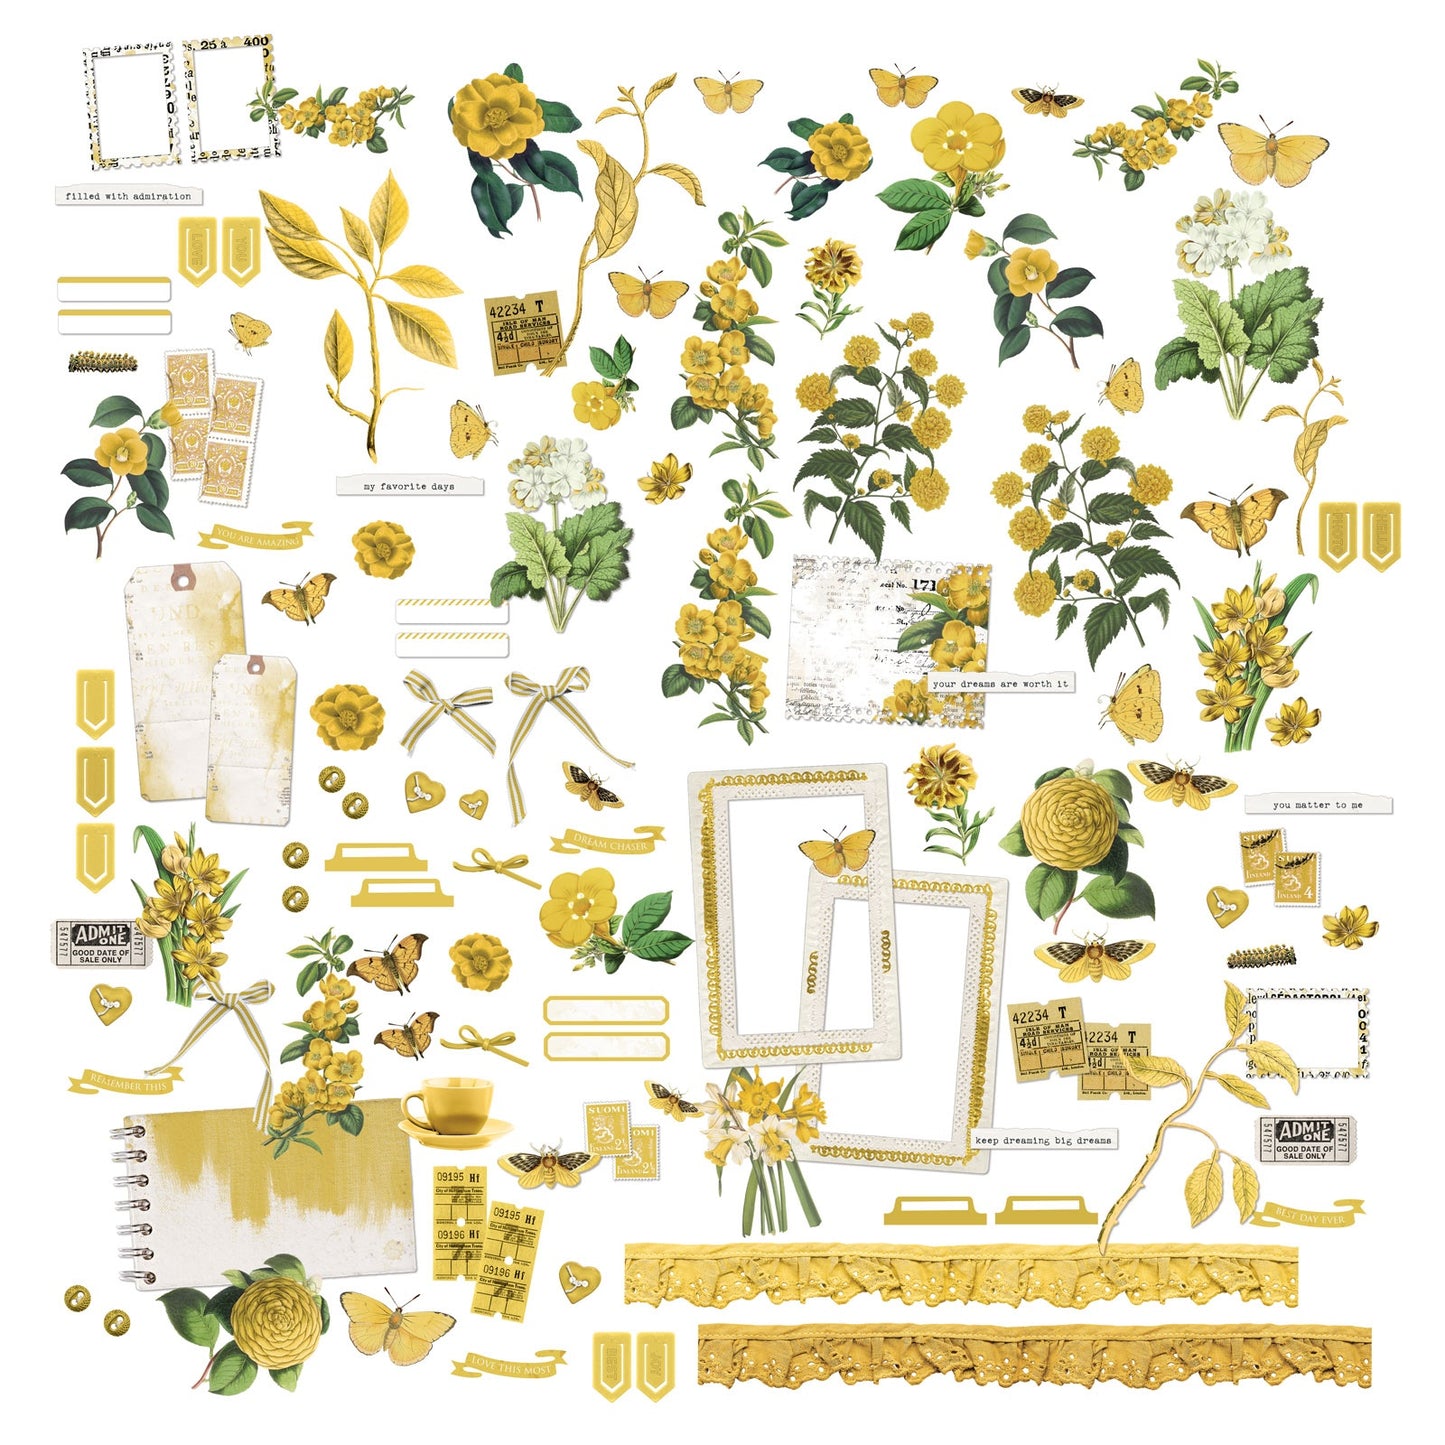 49 And Market Color Swatch: Ochre Mini Laser Cut Outs-Elements